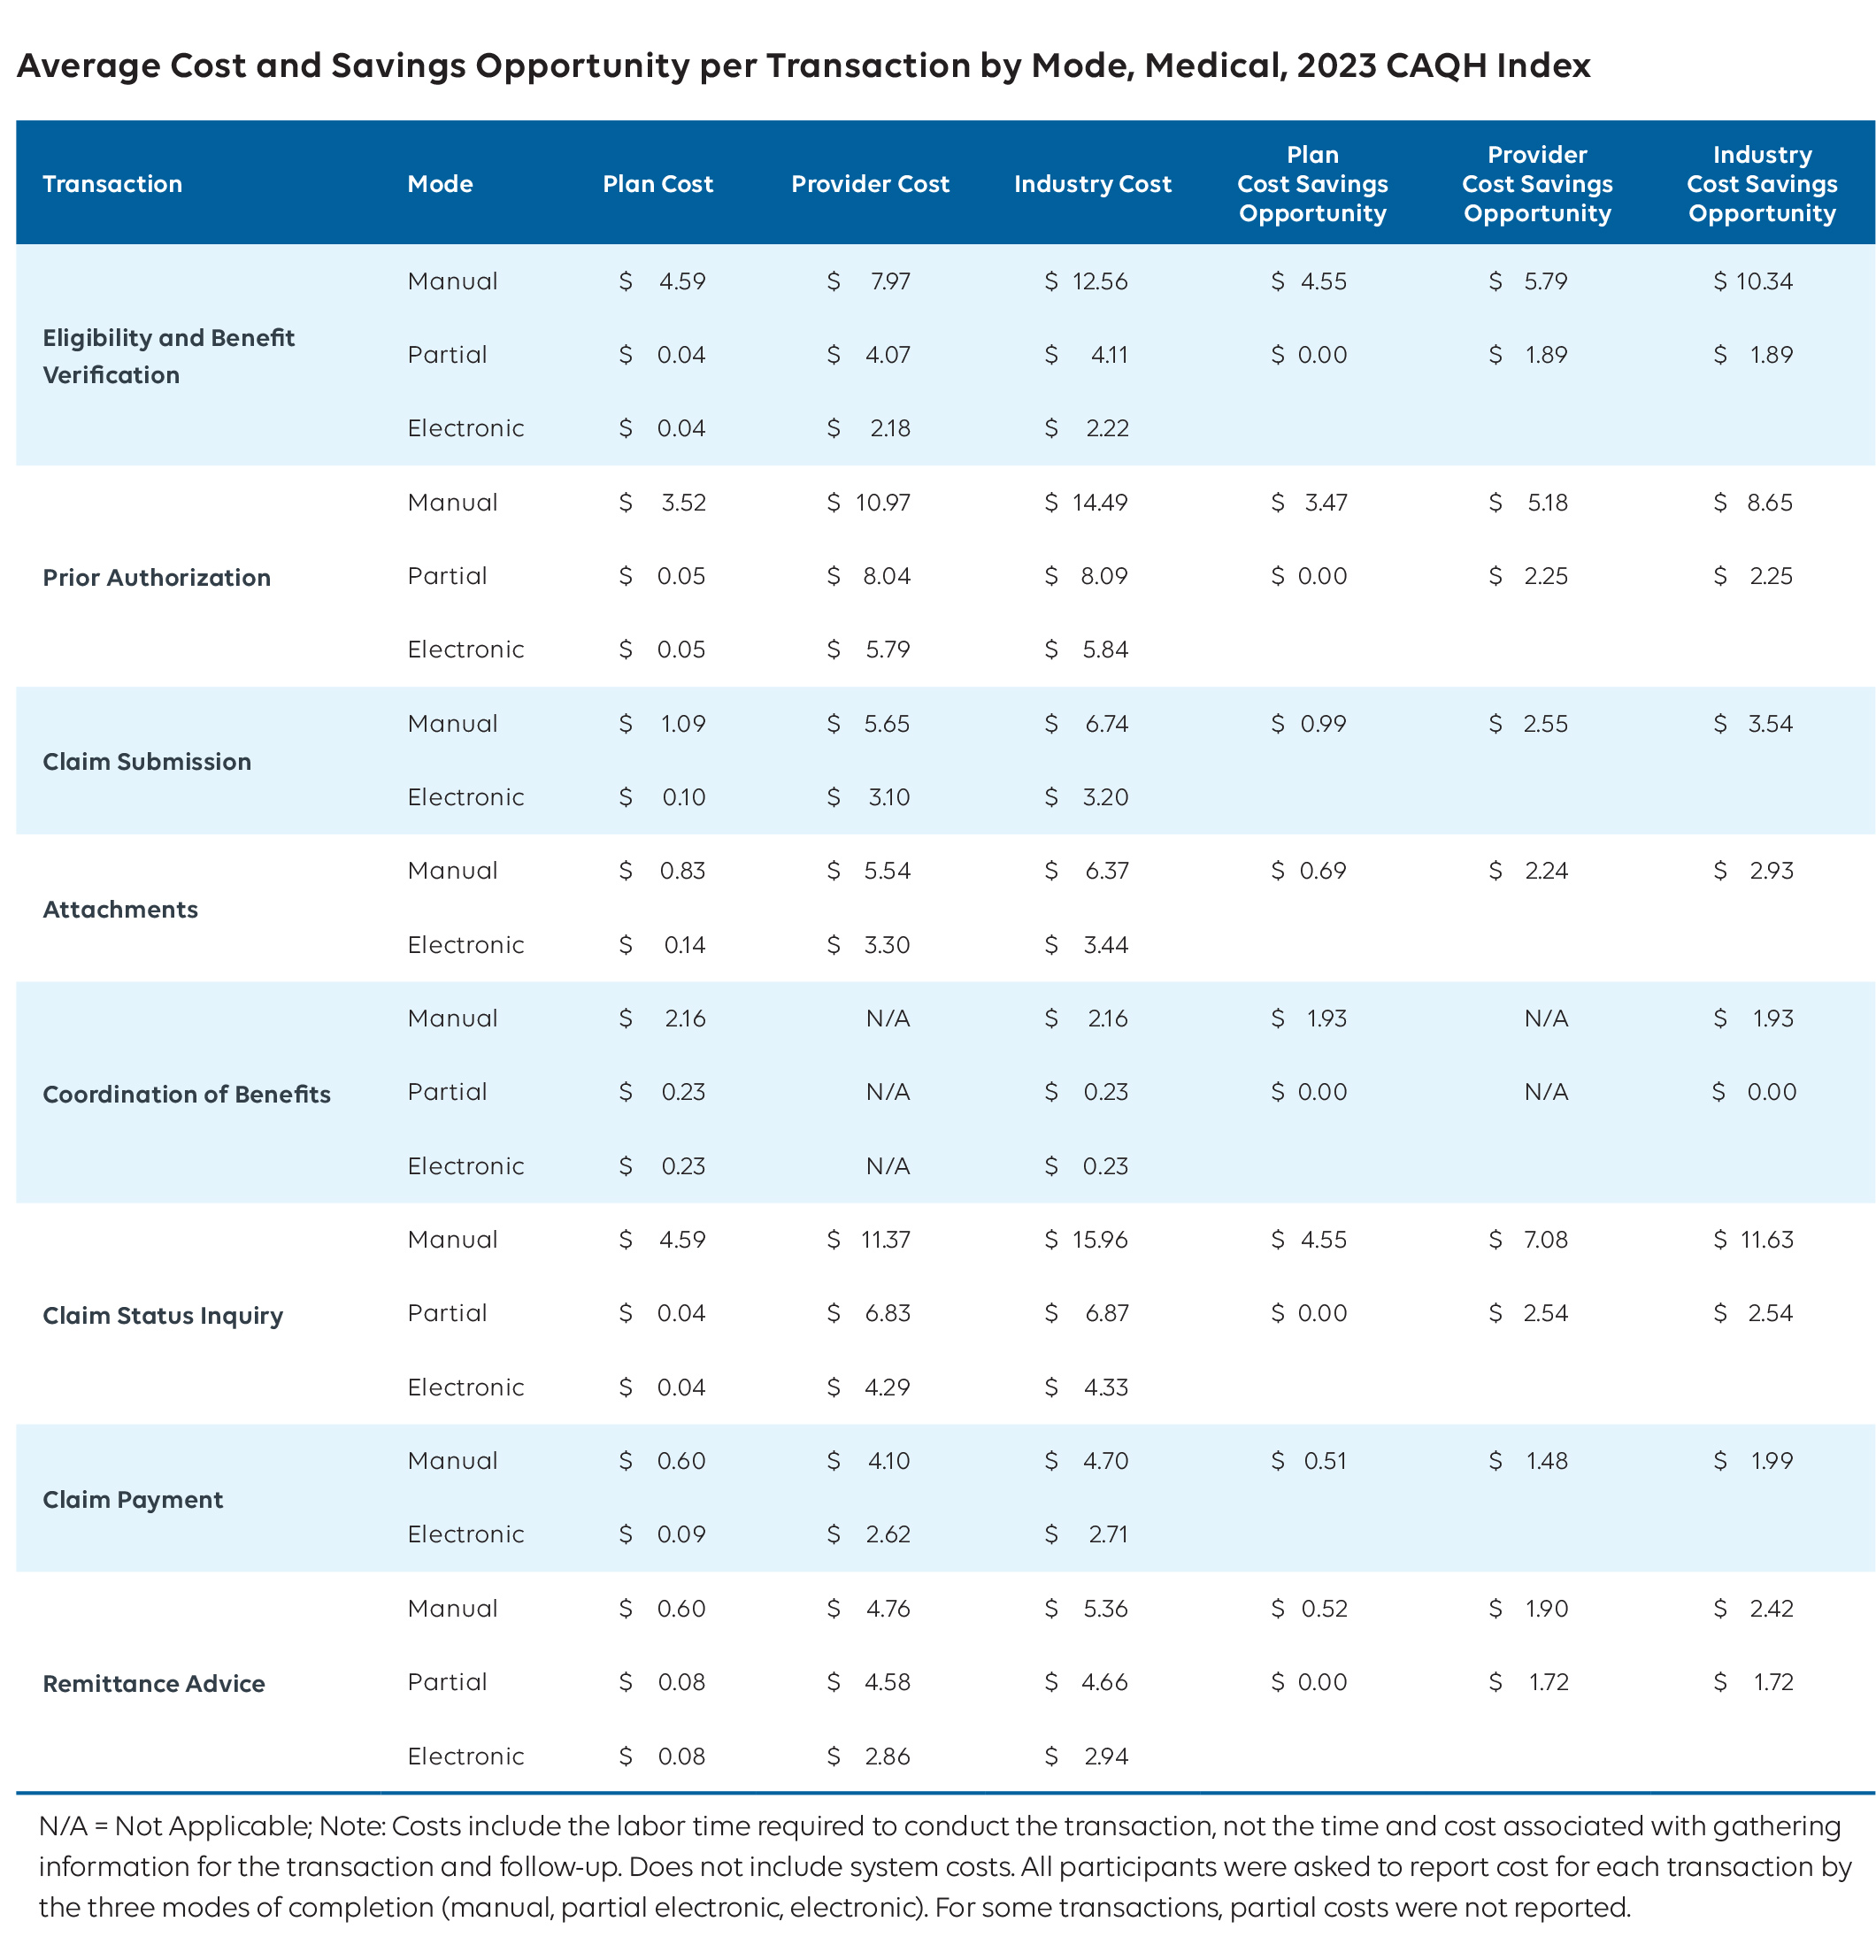 Average Cost and Savings Opportunity per Transaction by Mode, Medical, 2023 CAQH Index